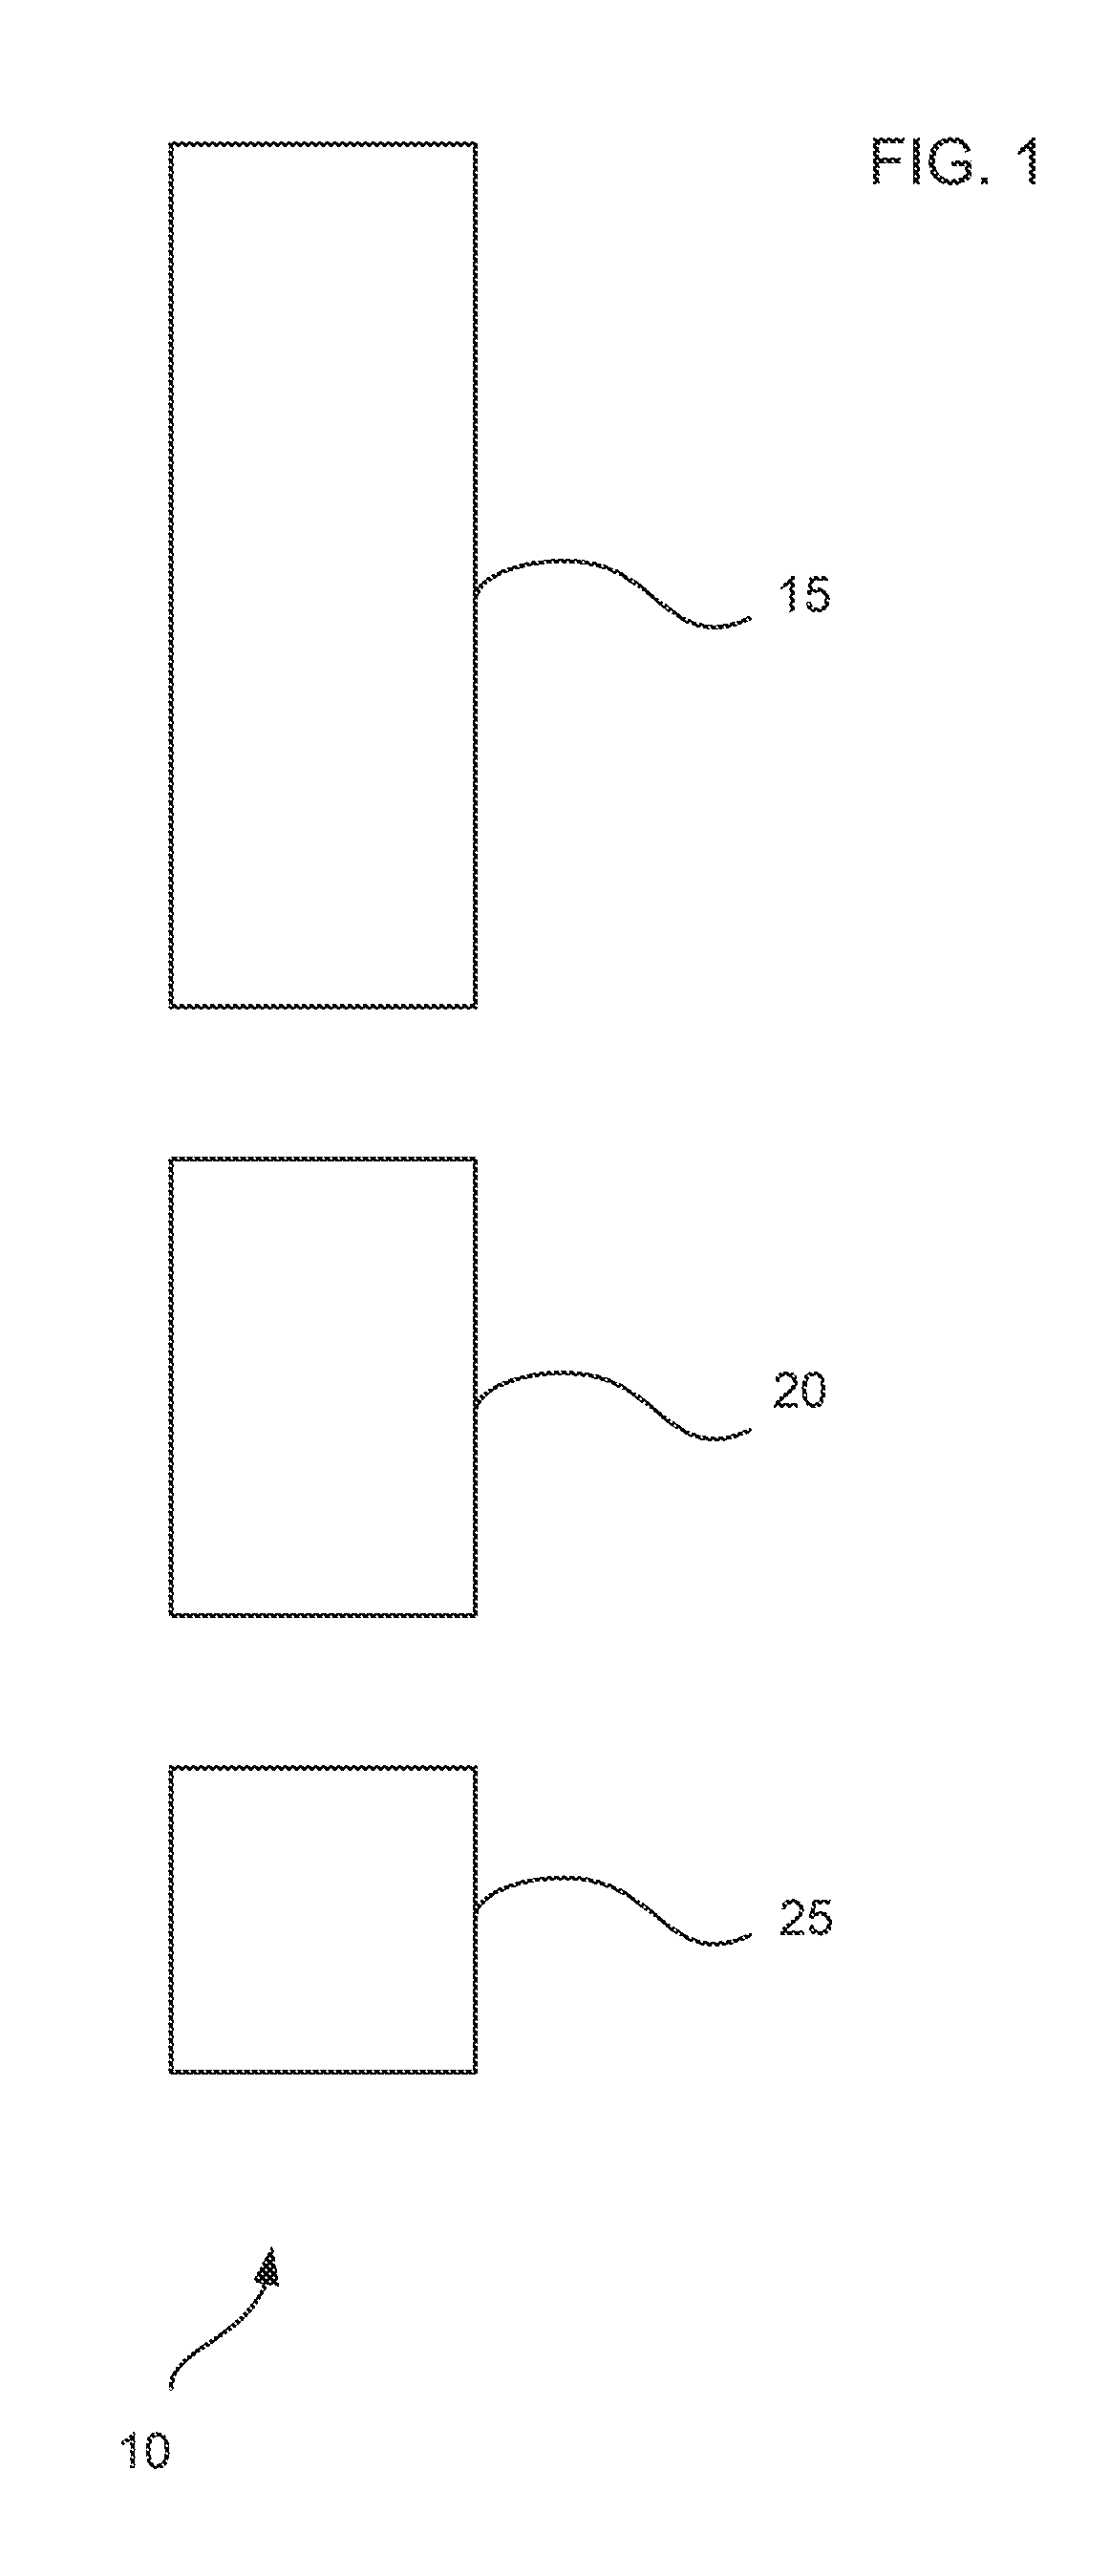 Kit and method for extracting and storing a skin tissue sample